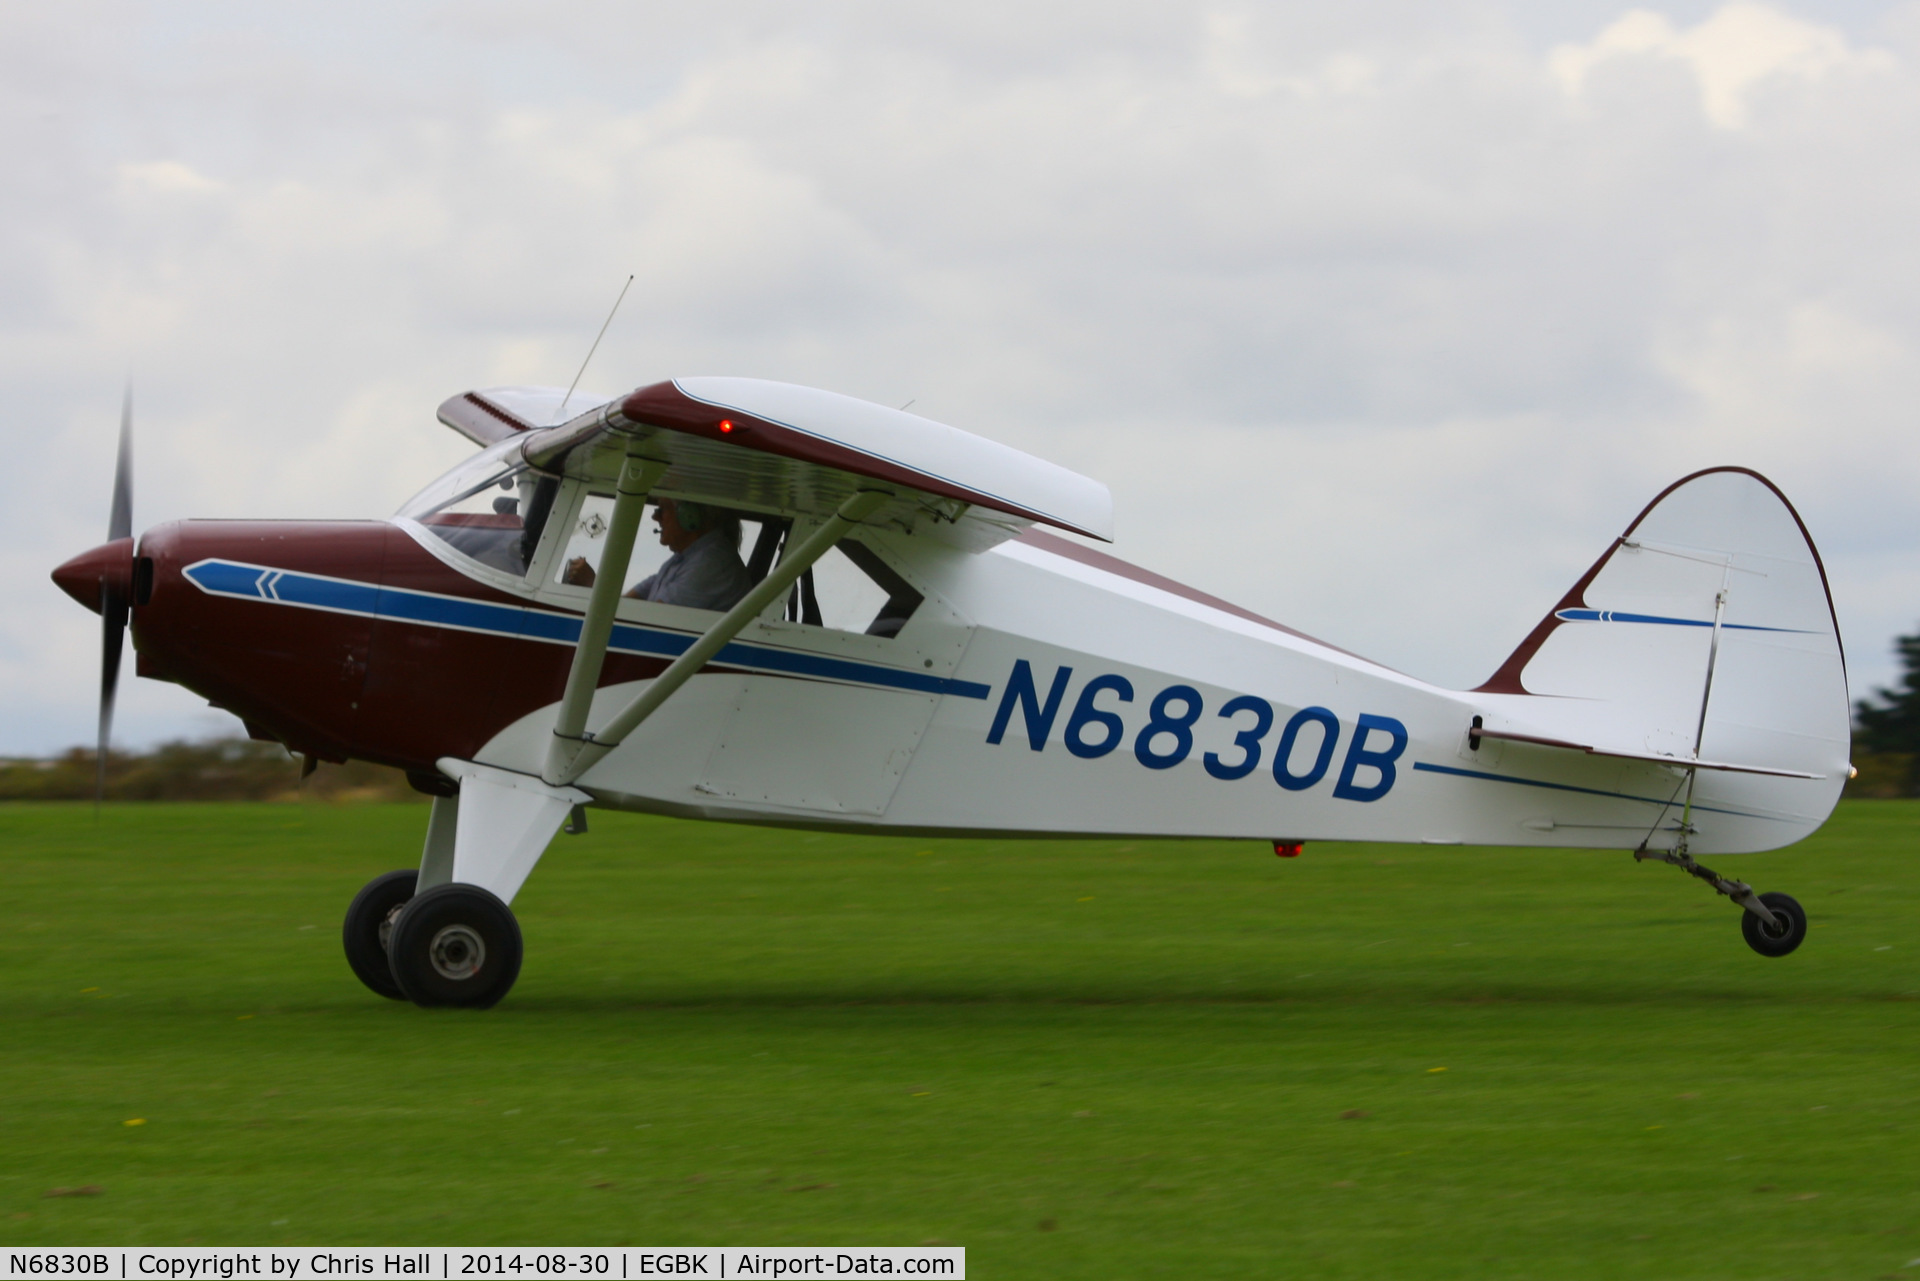 N6830B, Piper PA-22-150 C/N 22-4128, at the LAA Rally 2014, Sywell